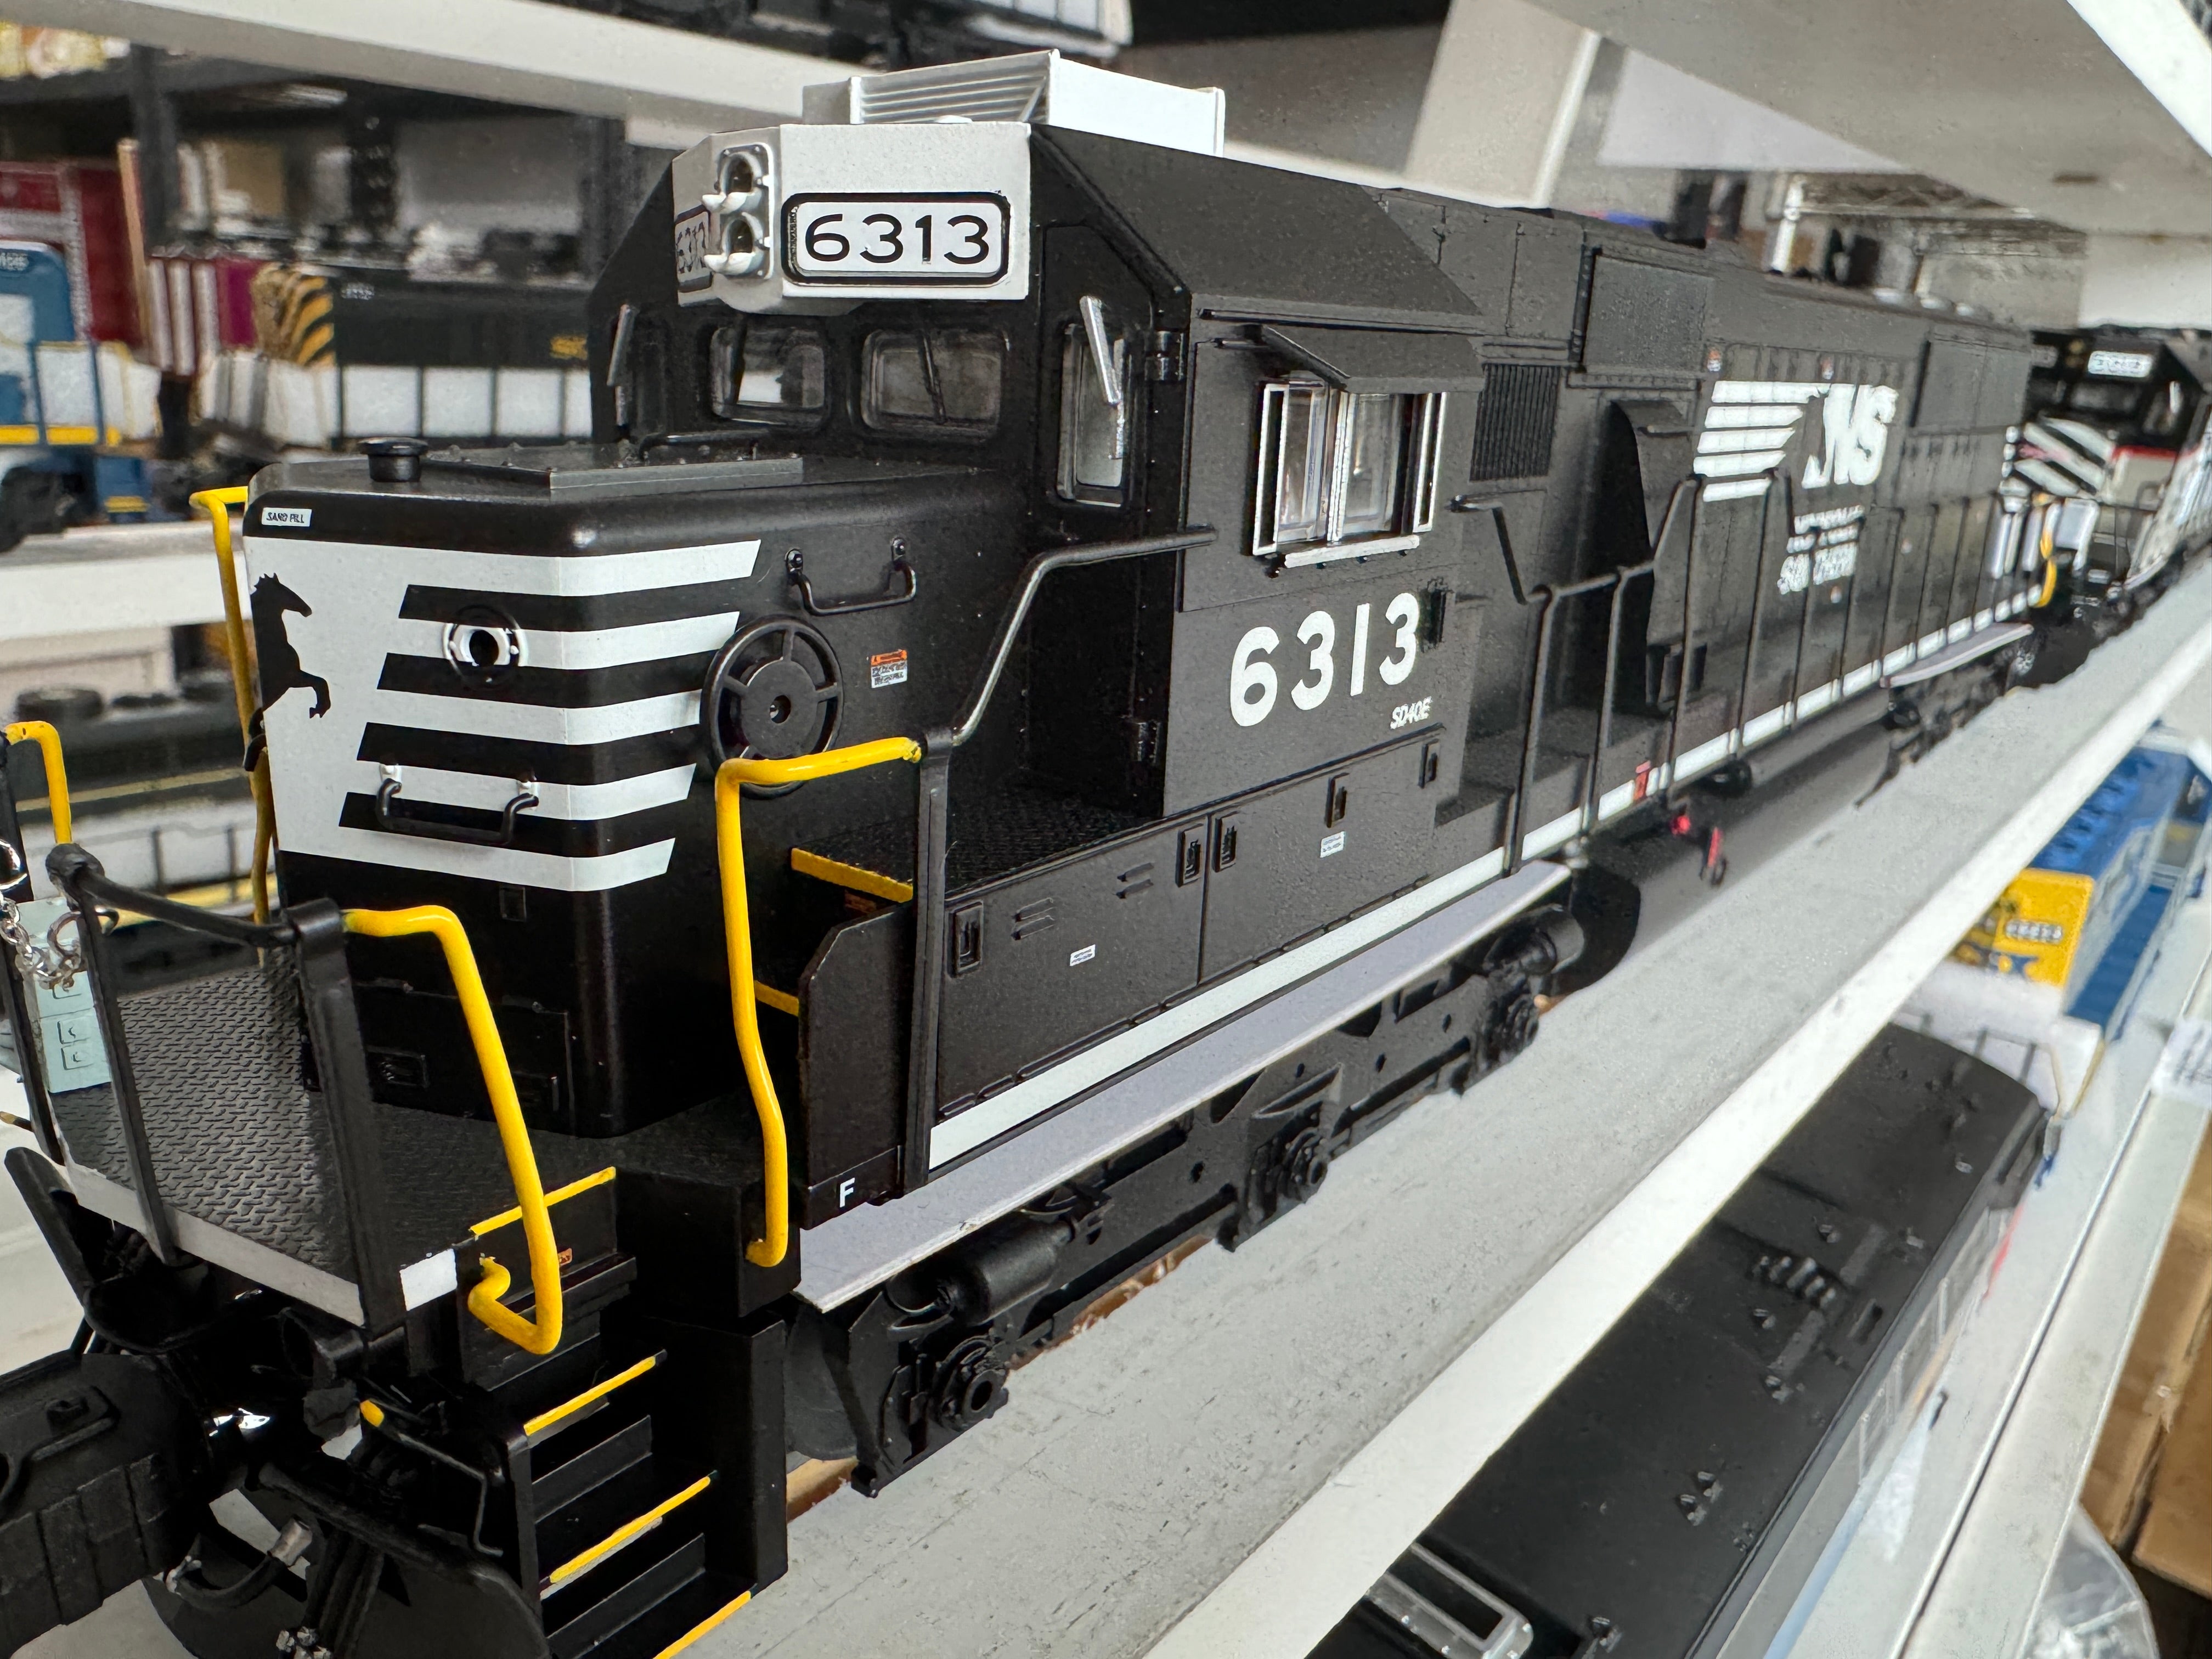 Lionel 2433281 - Legacy SD40E Diesel Engine "Norfolk Southern" #6313